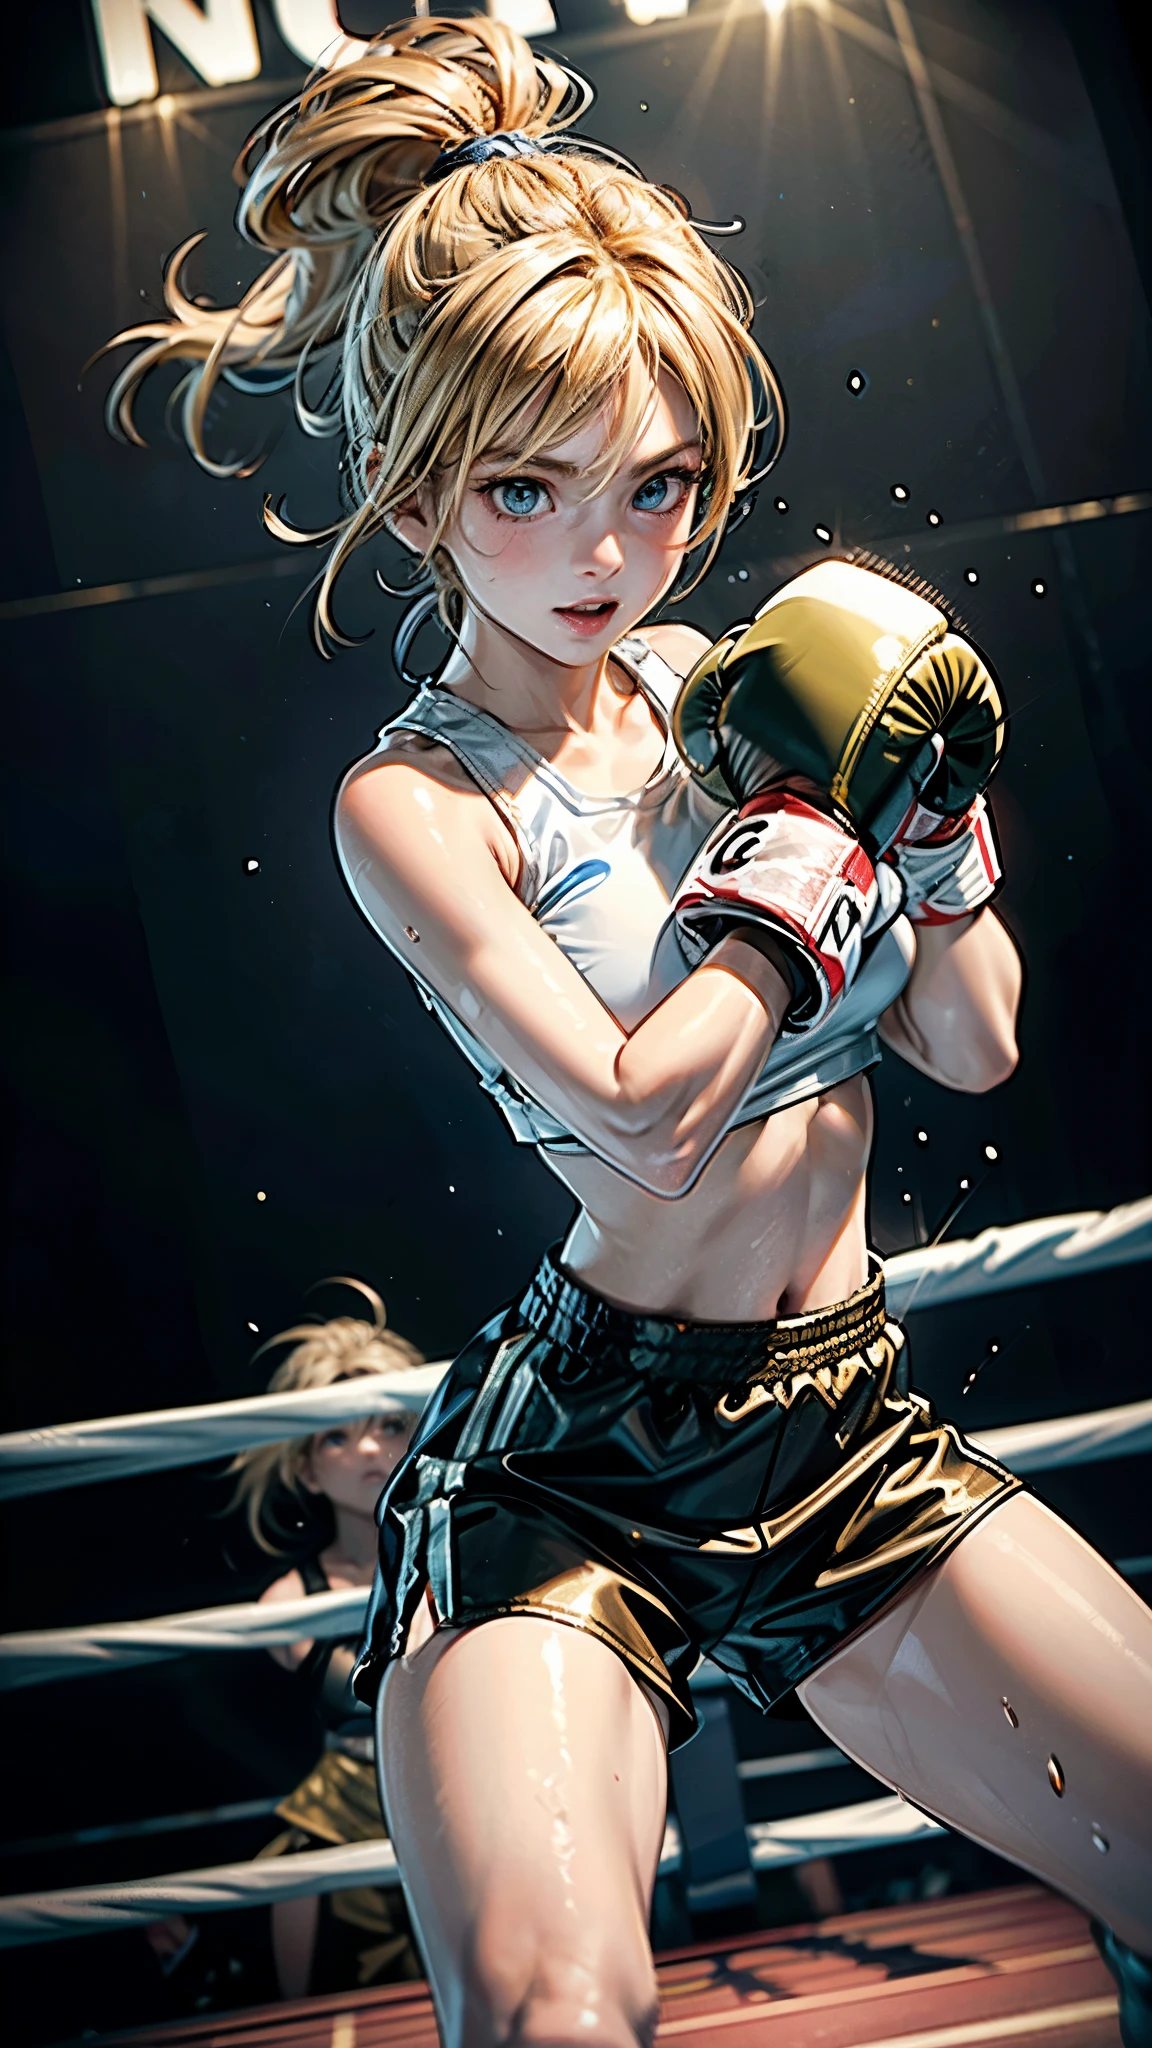 8k wallpaper of extremely detailed CG unit, ​masterpiece, hight resolution, top-quality, top-quality real texture skin,hyper realisitic, digitial painting,increase the resolution,RAW photosbest qualtiy,highly detailed,the wallpaper,two teen women,two teen women are hard pancing each other at boxing fight,1woman,teen,cute,kawaii,hair floating,messy hair,blonde hair,messy hair,pony tail hair,skin color white,eye color blue,eyes shining,big eyes,breast,sports wear,super big smile,(boxing gloves:1.6),(dynamic pose:1.4),(dynamic angle:1.8),sweat,boxing wounds on face,dirty,(gold trophy and champion belt:1.2),she is a winner of a match, BREAK ,(motion blur),boxing ring,1boxing referee,1trainer,audiences,[nsfw:2.0],